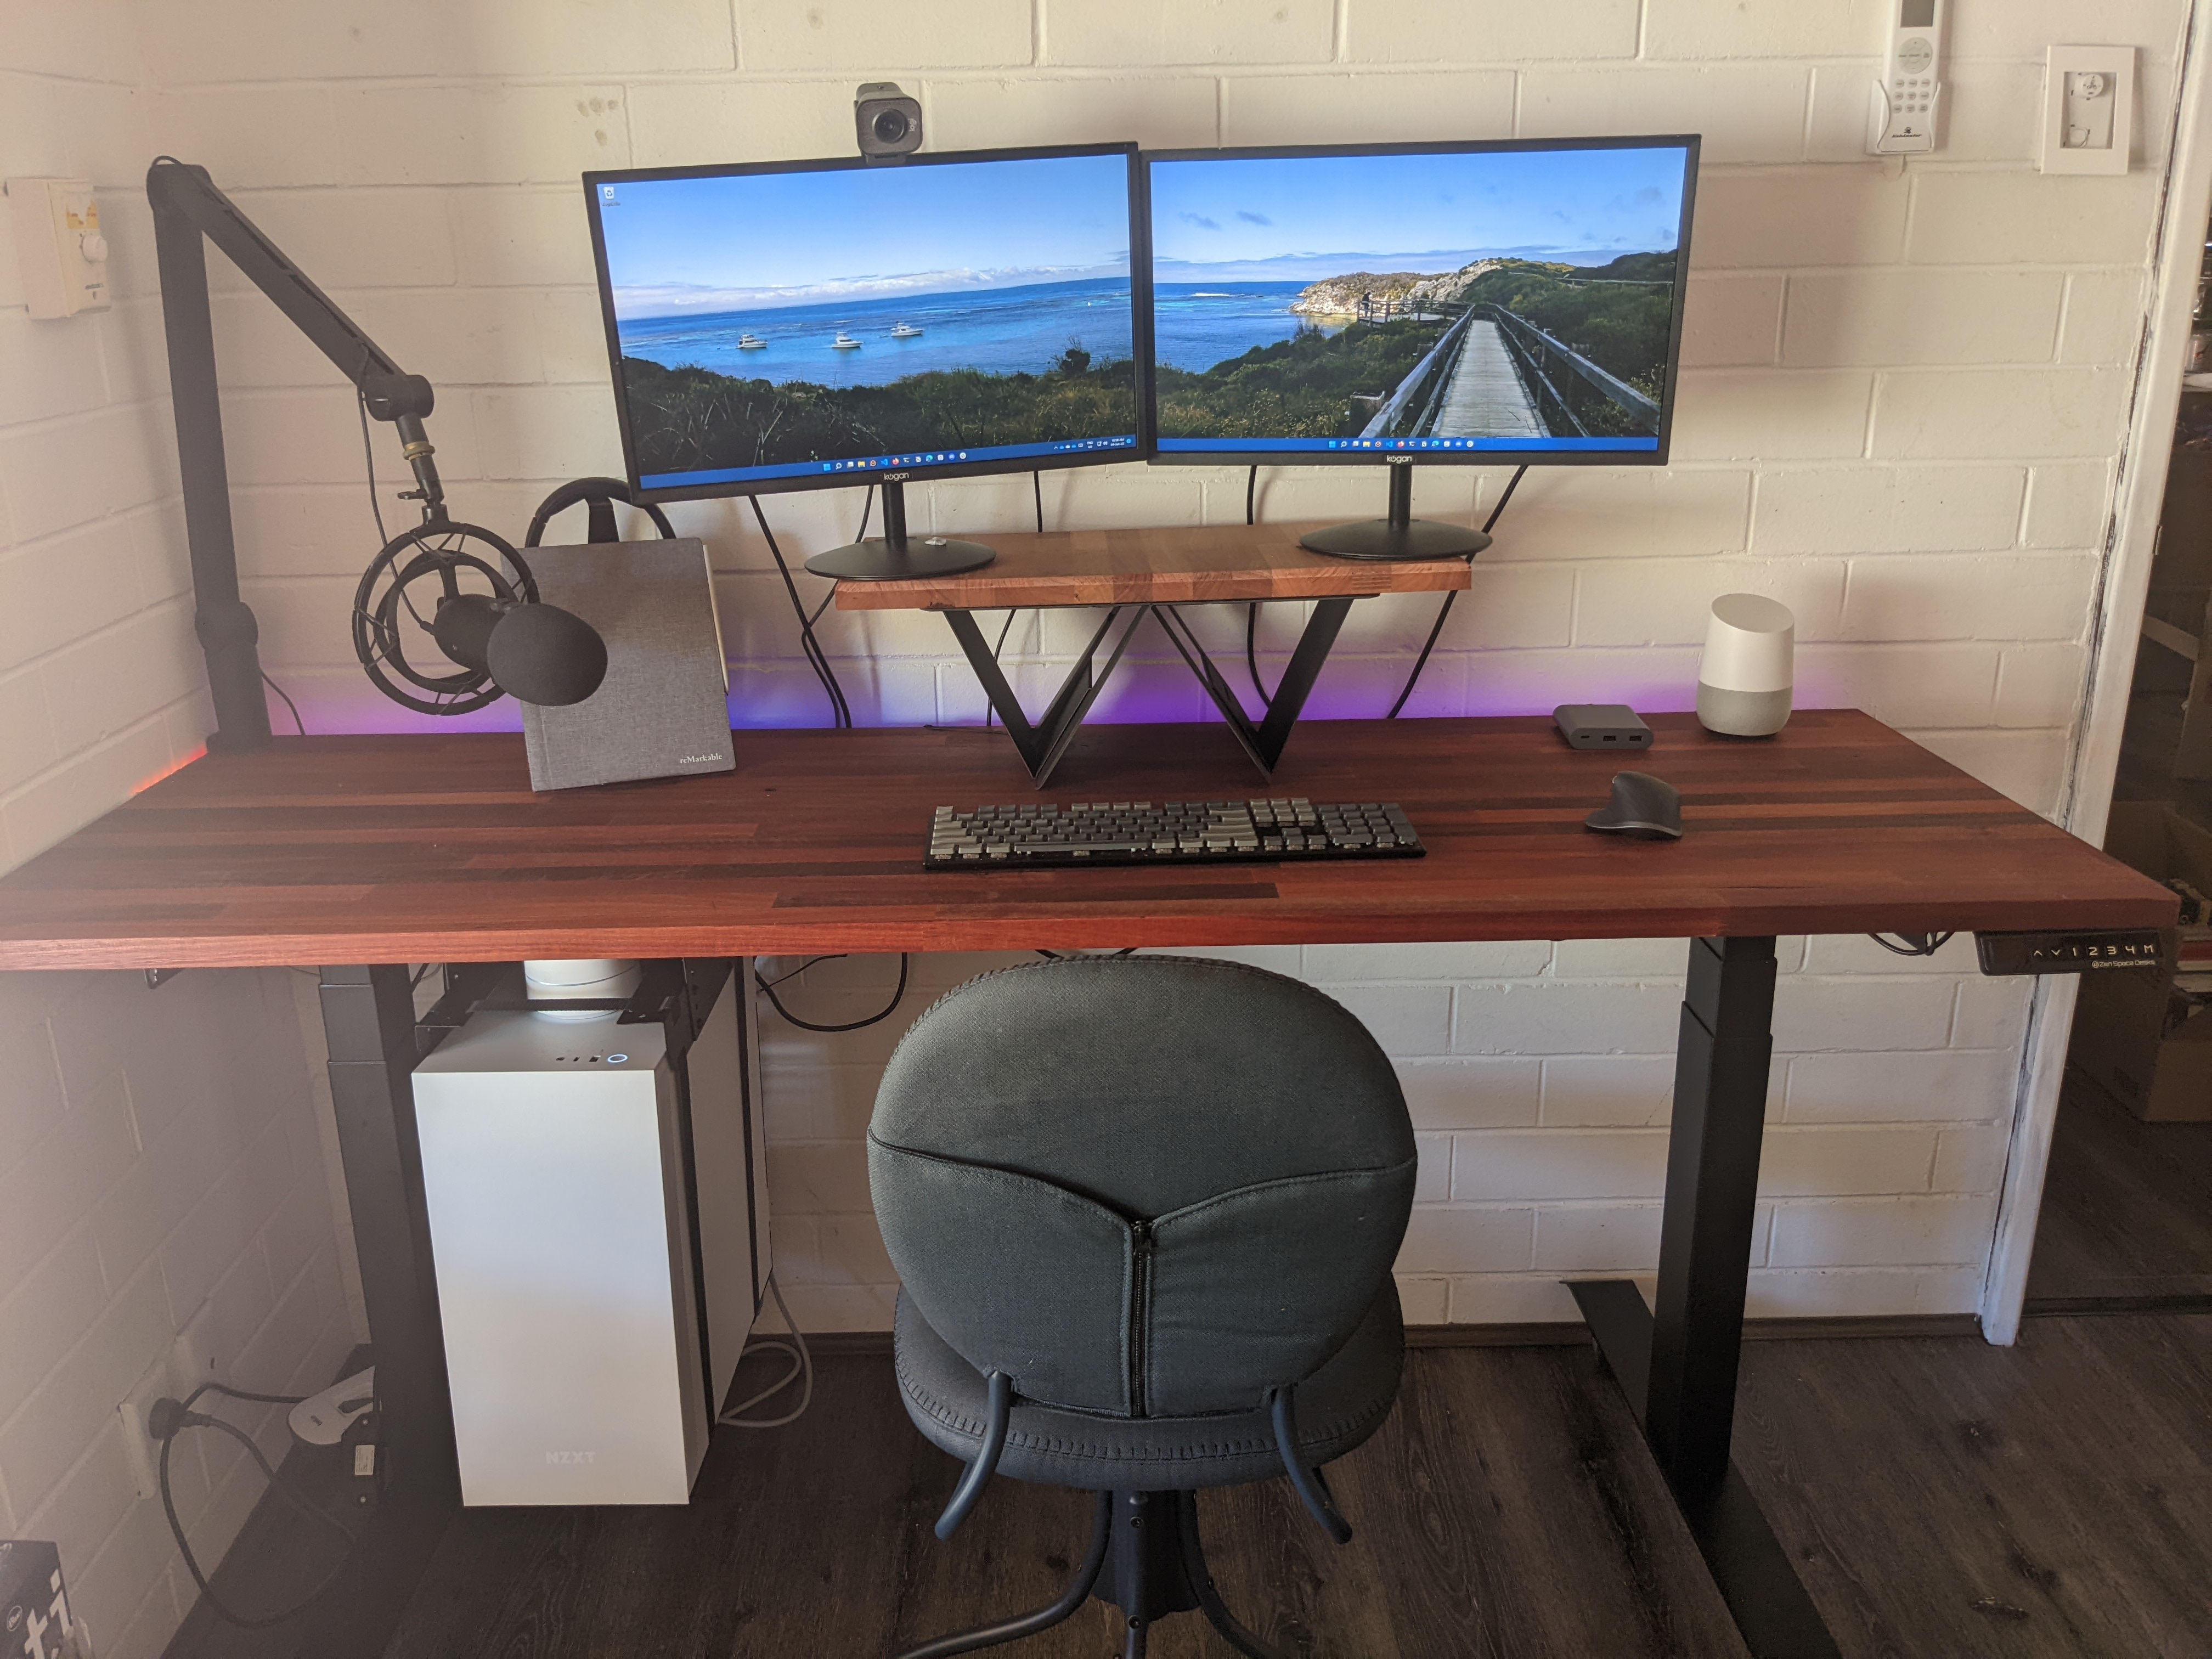 Assembled desk with two monitors balanced precariously on a board on a folding laptop desk, with a mic on a boom arm swinging in from the side of the desk